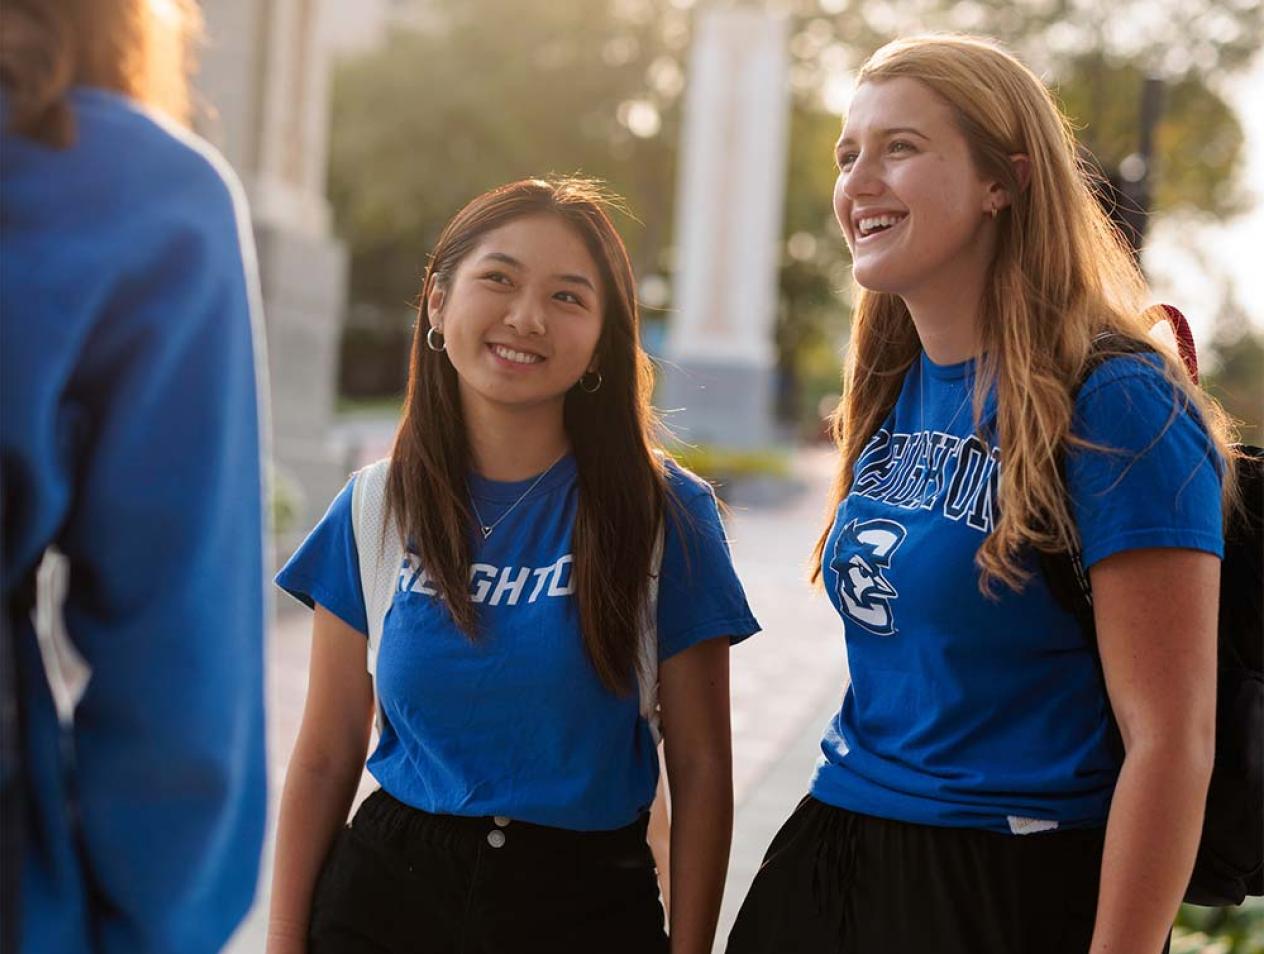 Why Creighton for Your Undergrad Degree?